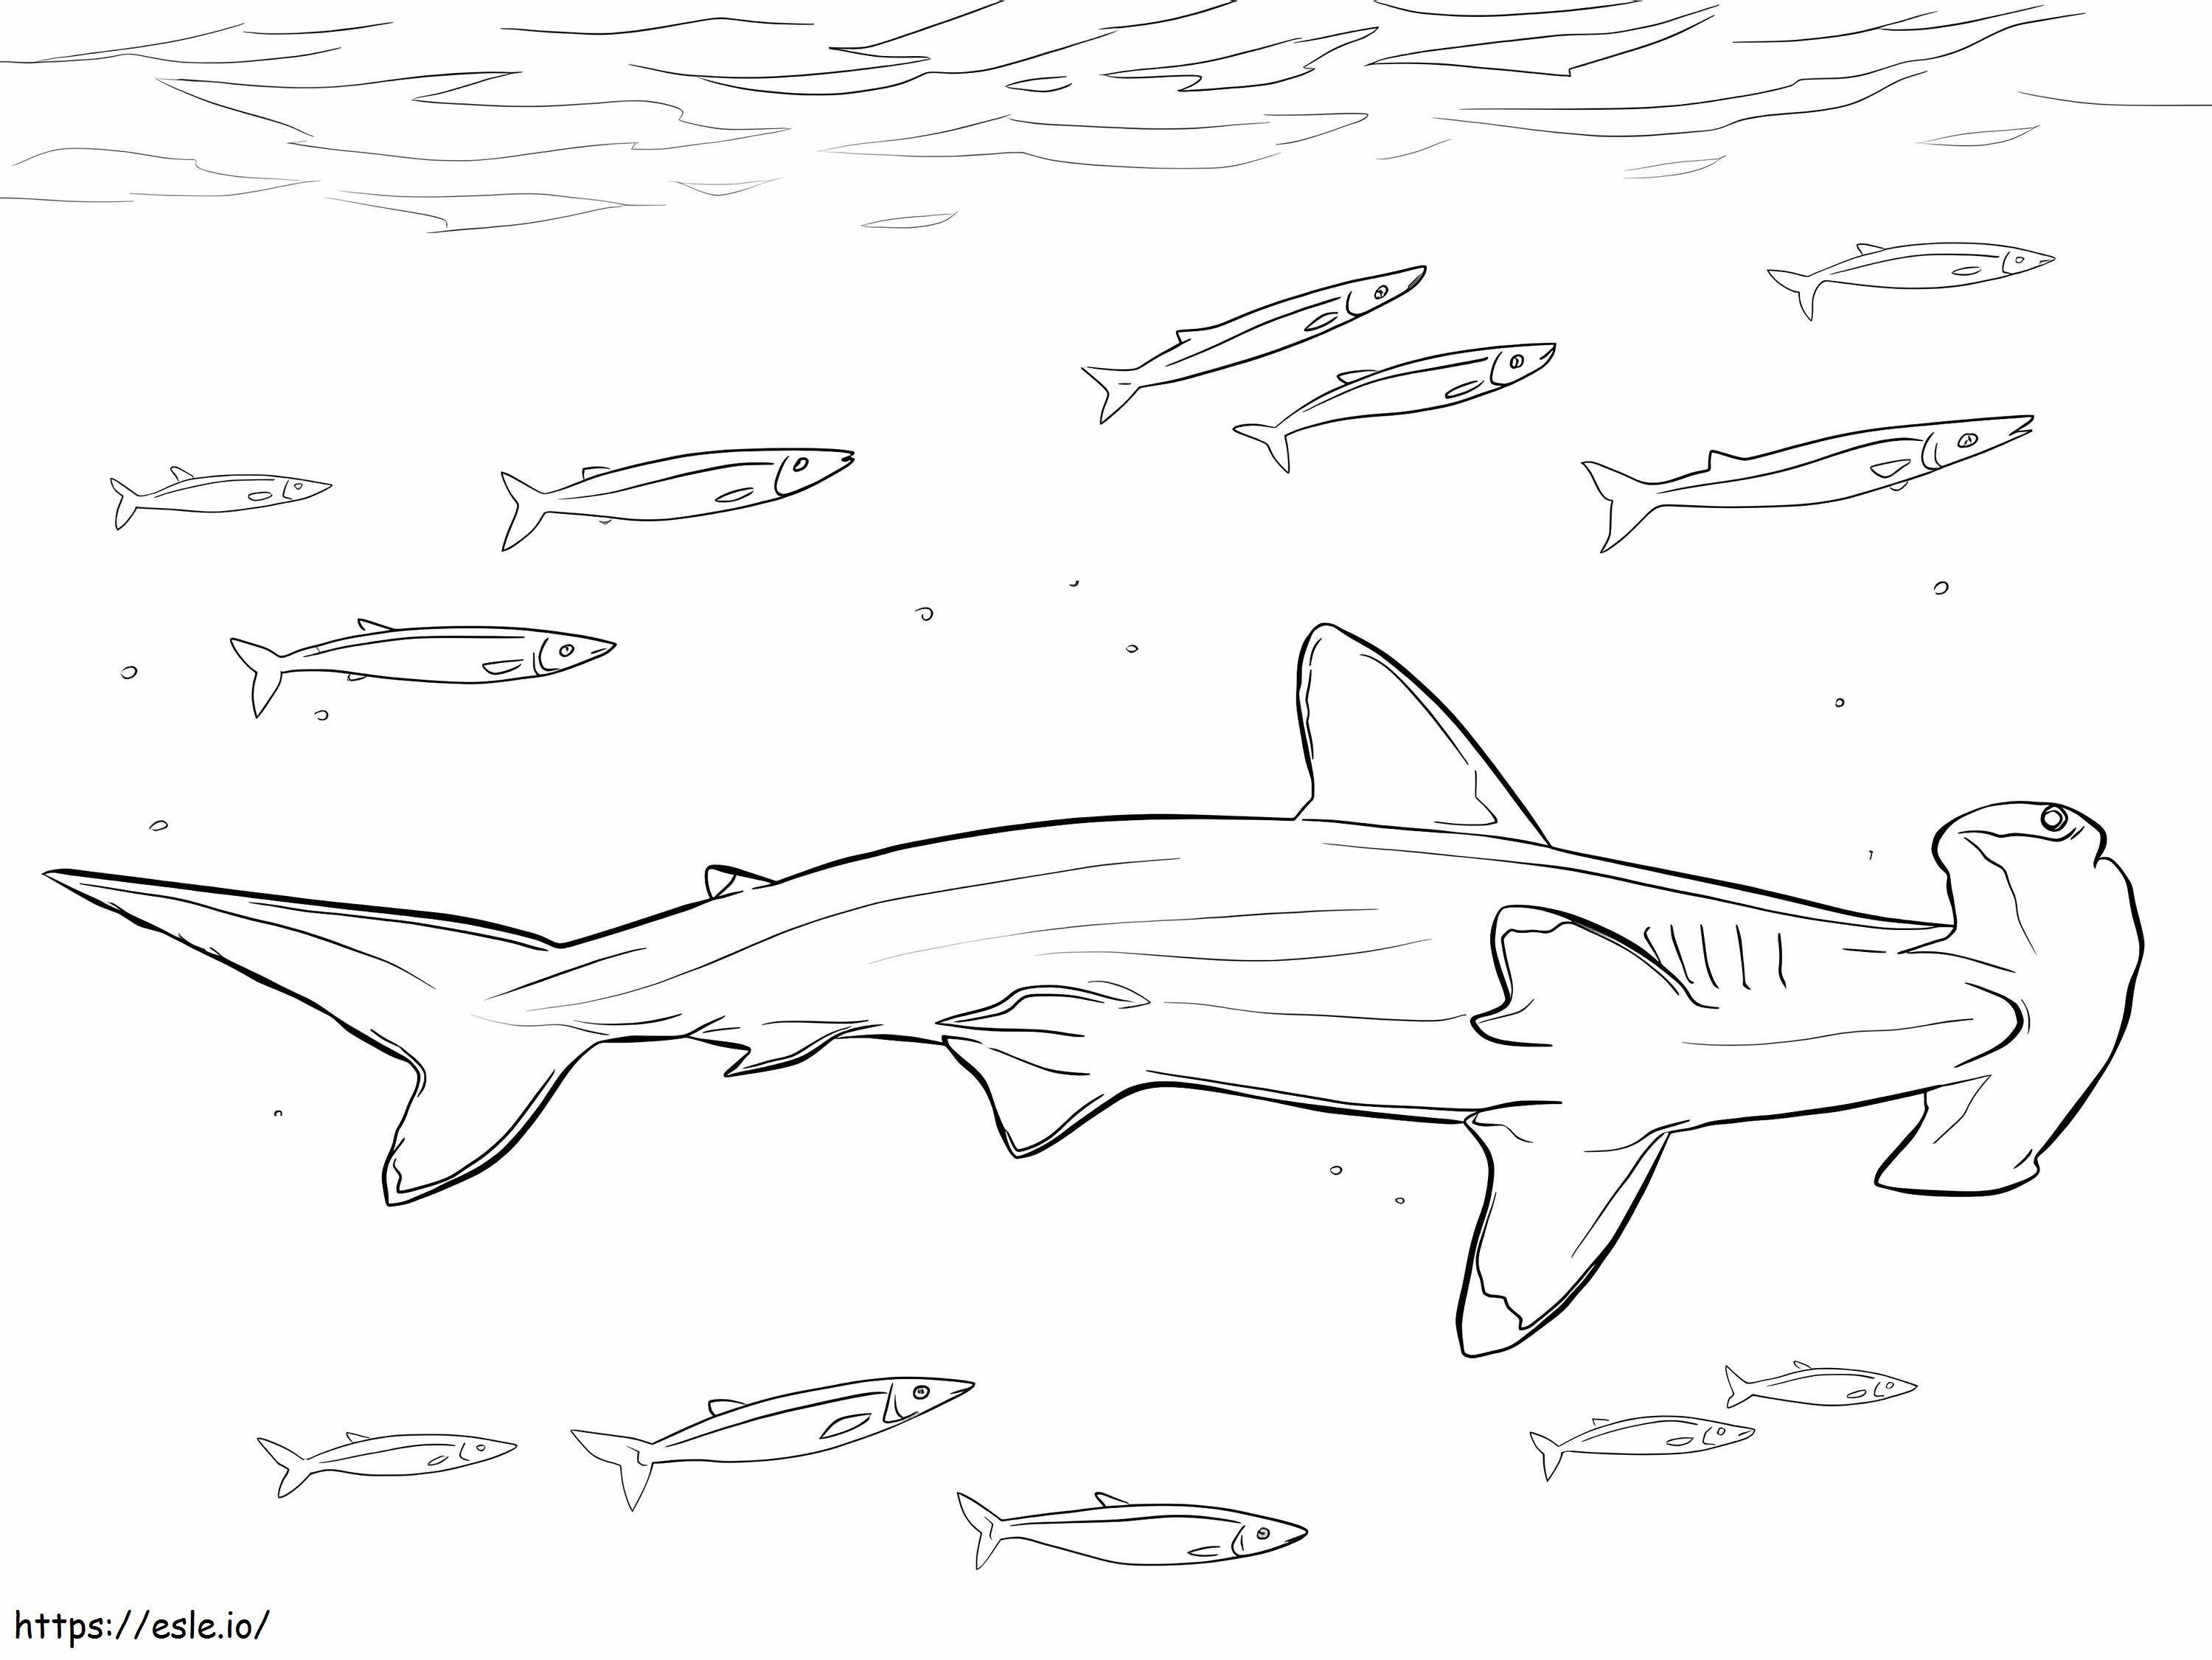 Hammerhead Shark And Fishes coloring page